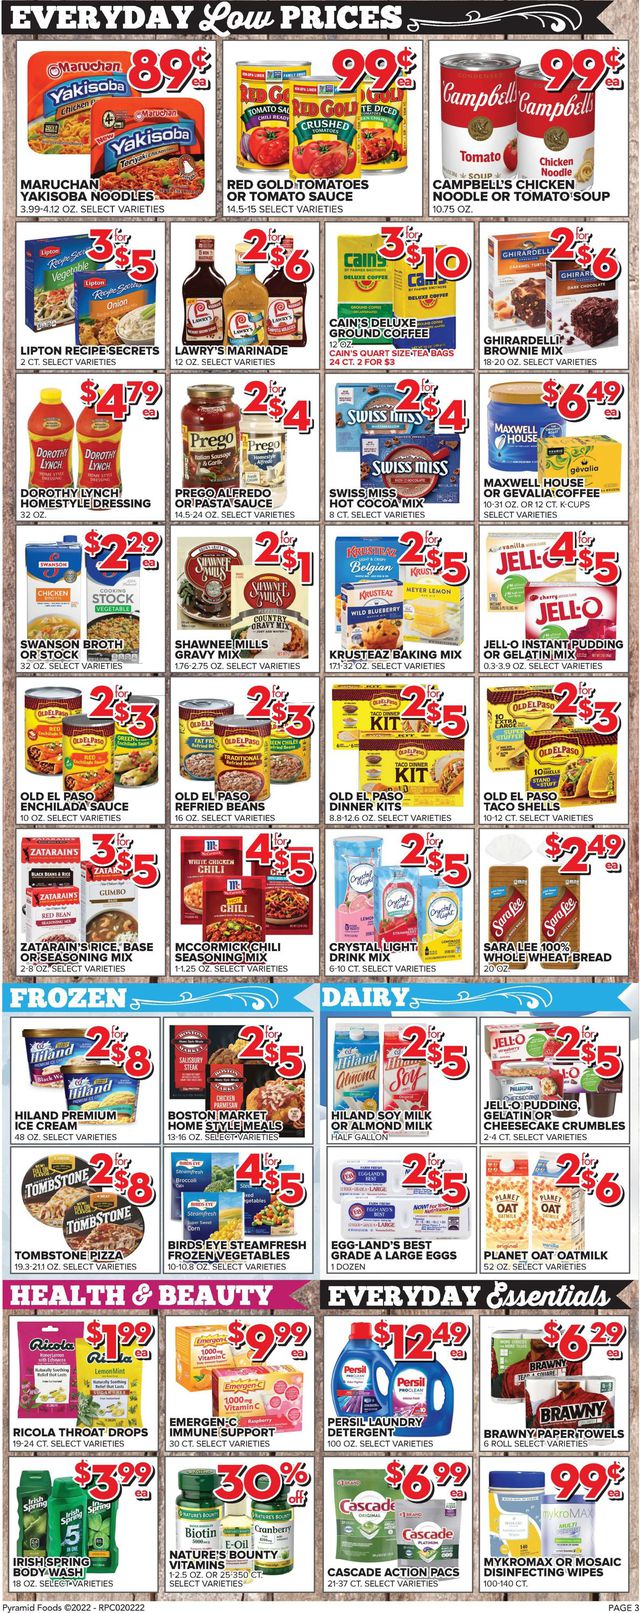 Price Cutter Ad from 02/02/2022